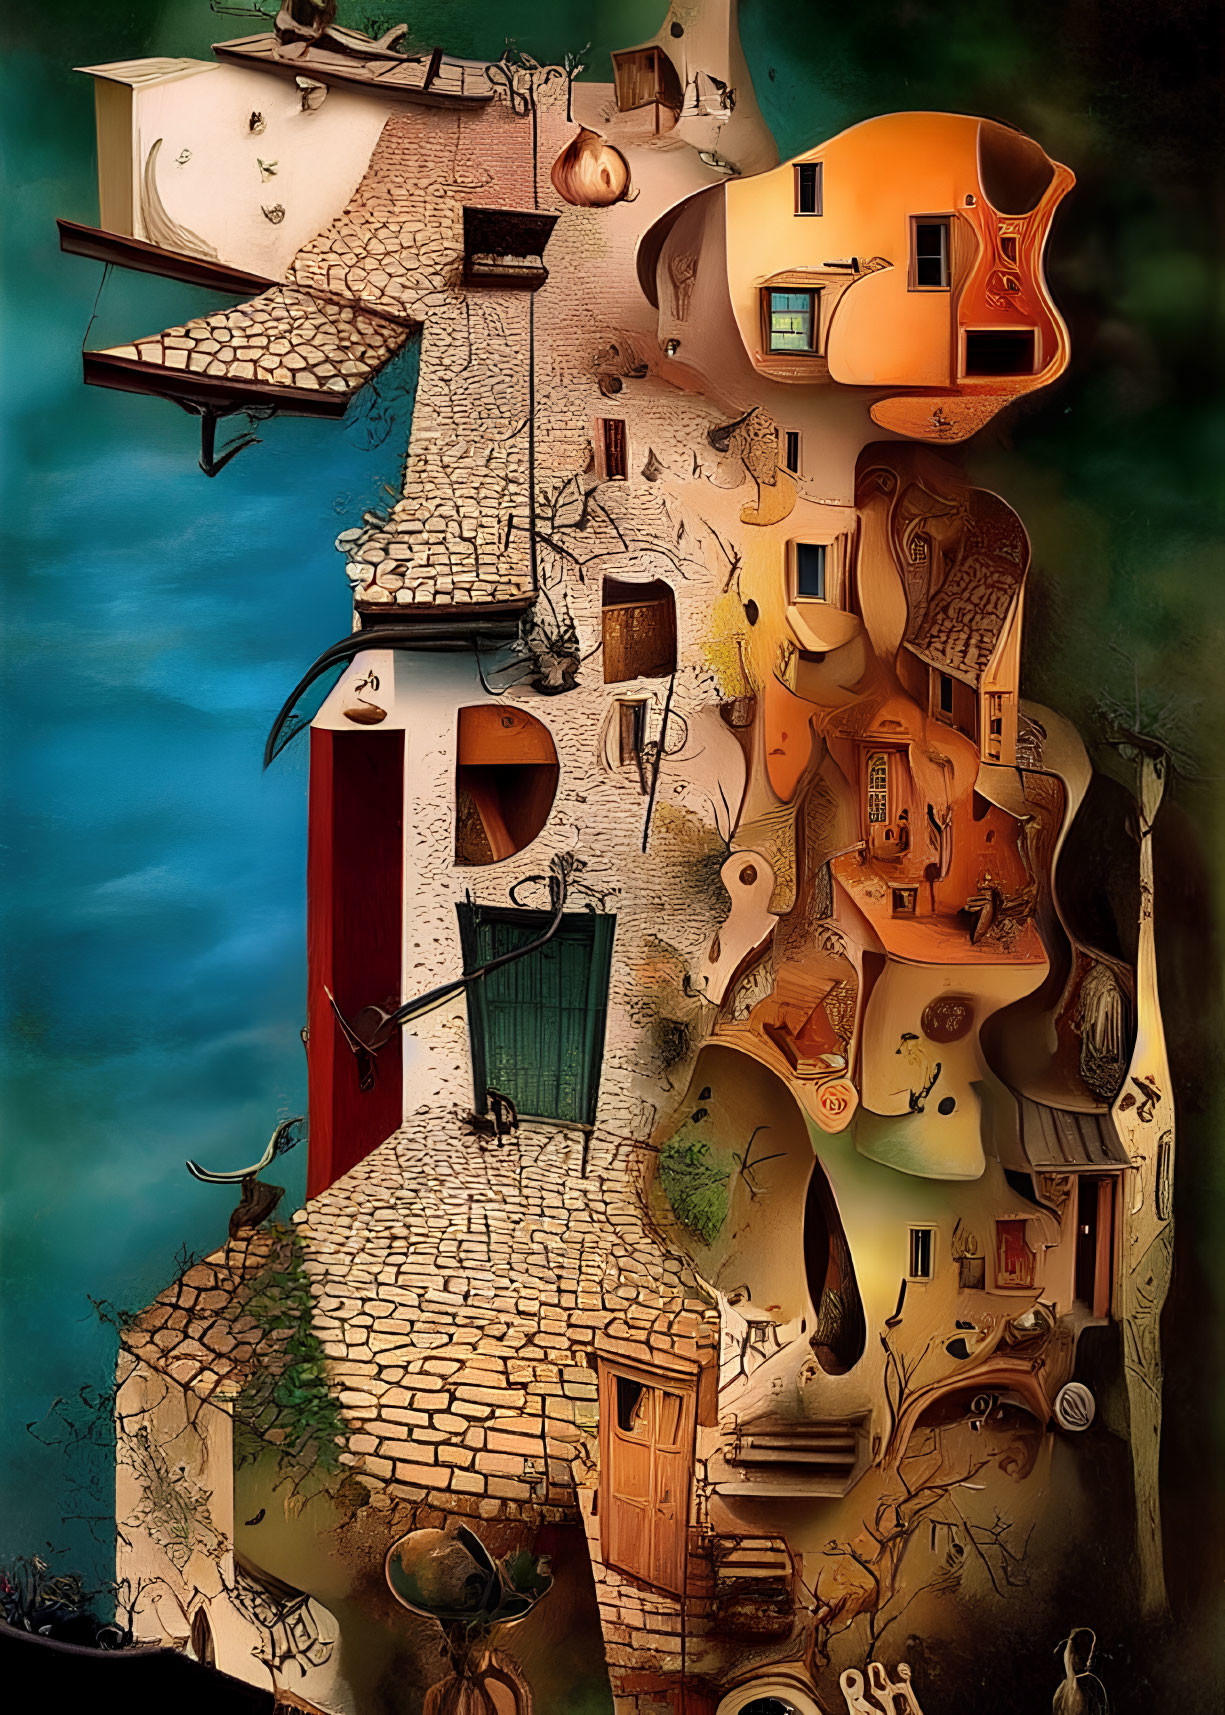 Whimsical vertical village painting with surreal architecture on teal background